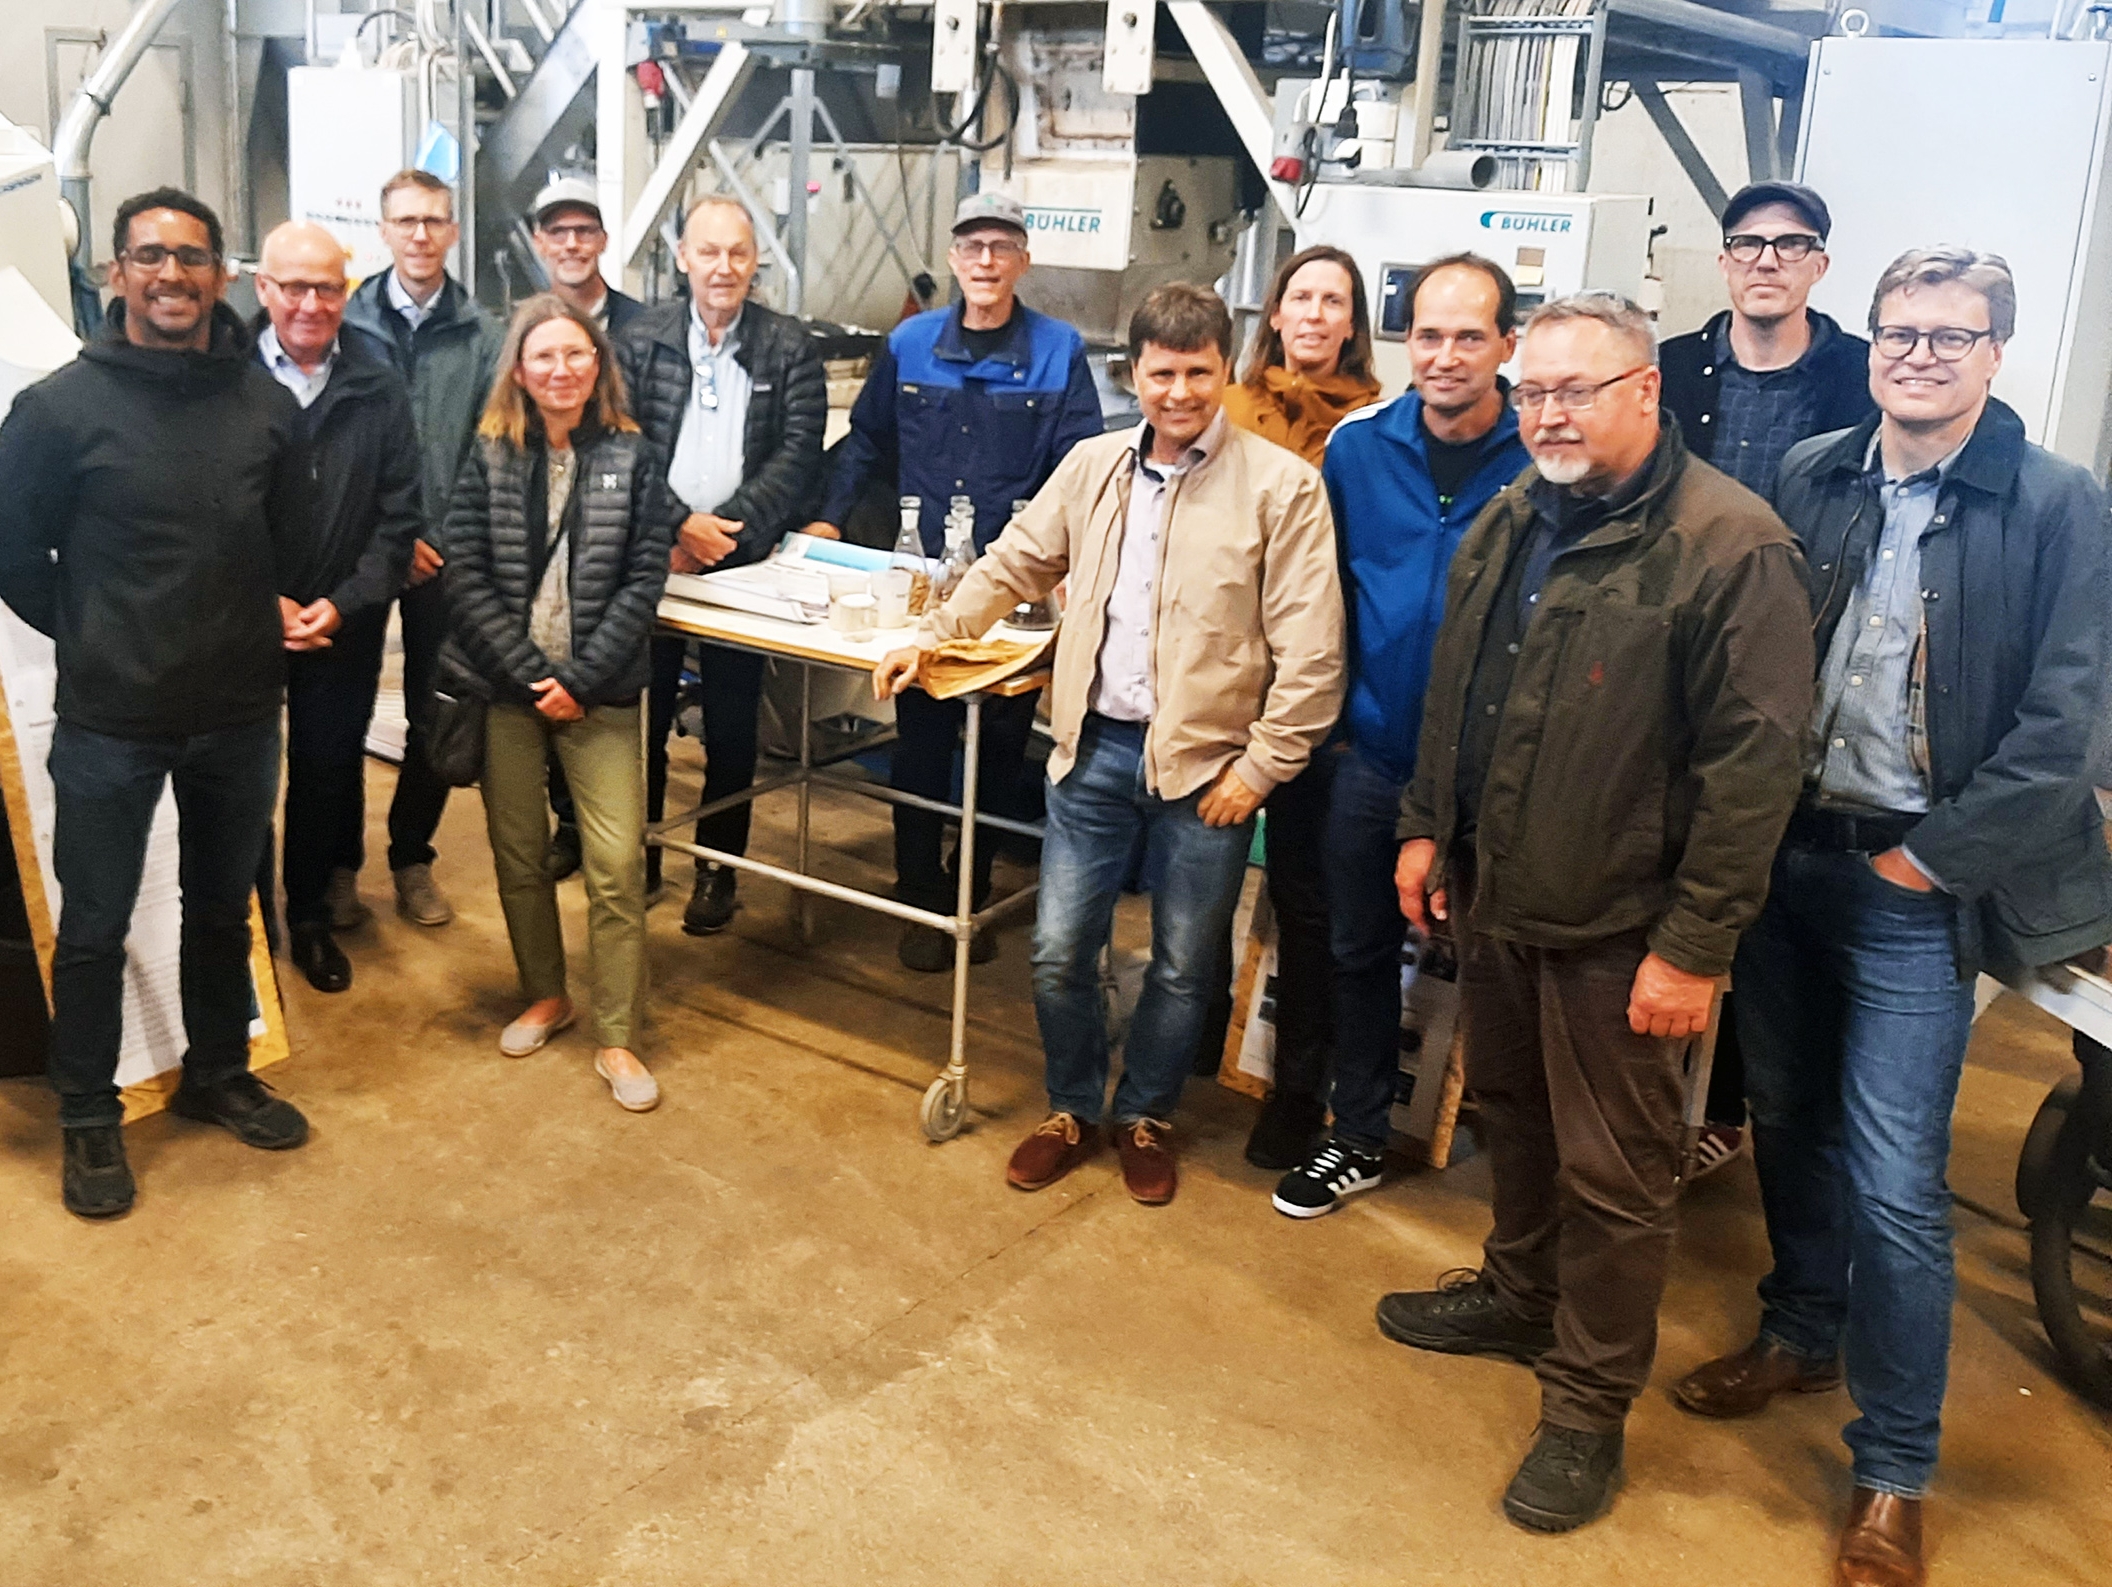 Bio4Energy Advisory Board at an excursion to the Biomass Technology Centre, Swedish University of Agricultural Sciences. Photo published with permission.